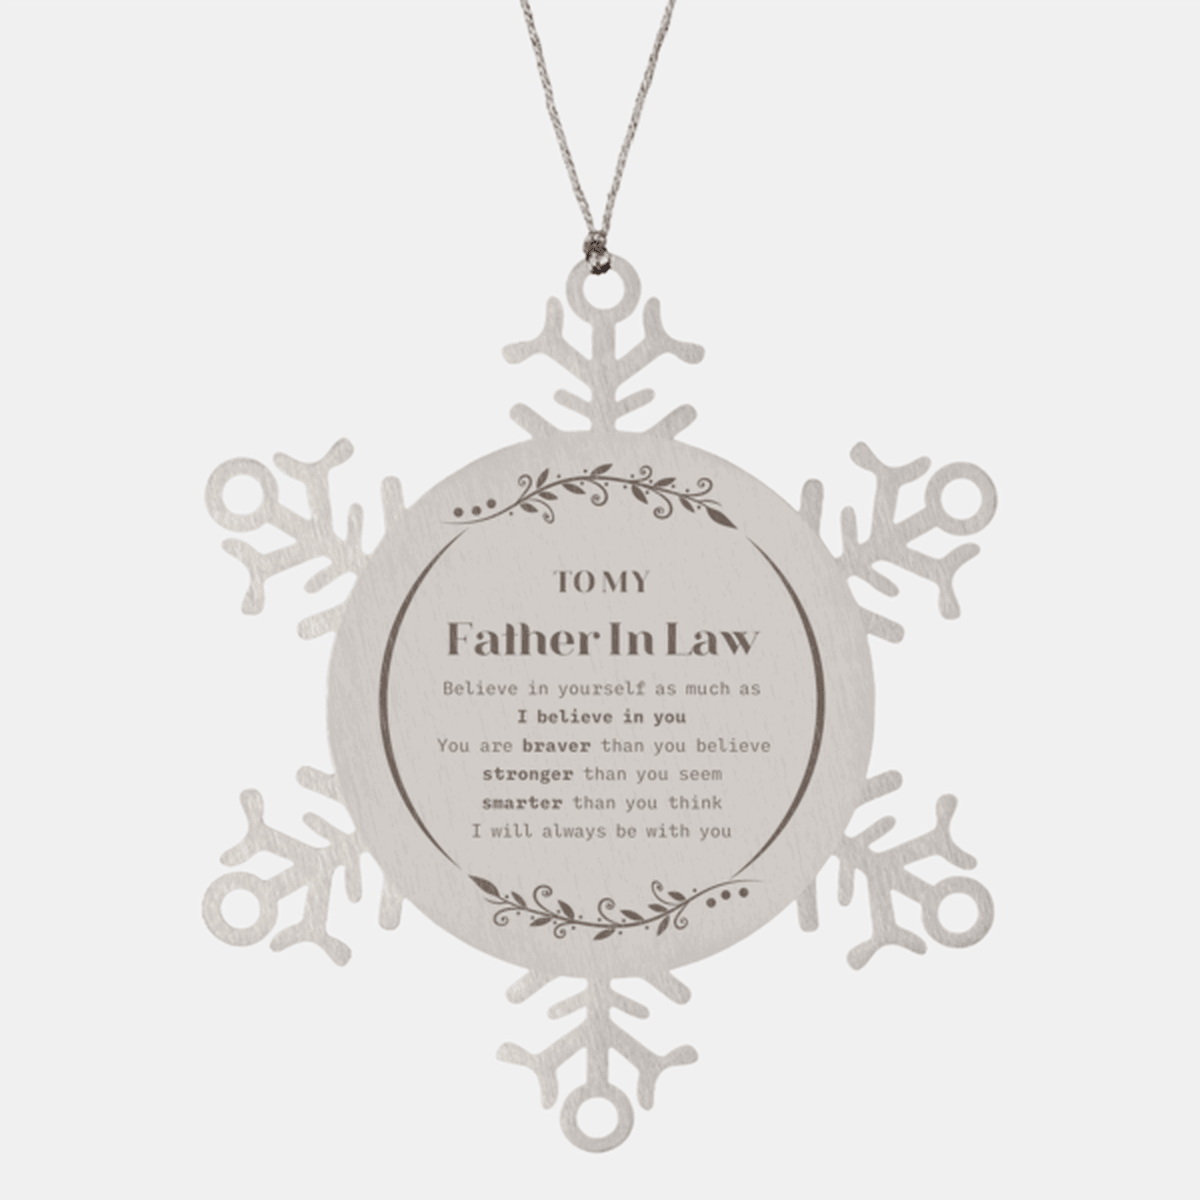 Father In Law Snowflake Ornament Gifts, To My Father In Law You are braver than you believe, stronger than you seem, Inspirational Gifts For Father In Law Ornament, Birthday, Christmas Gifts For Father In Law Men Women